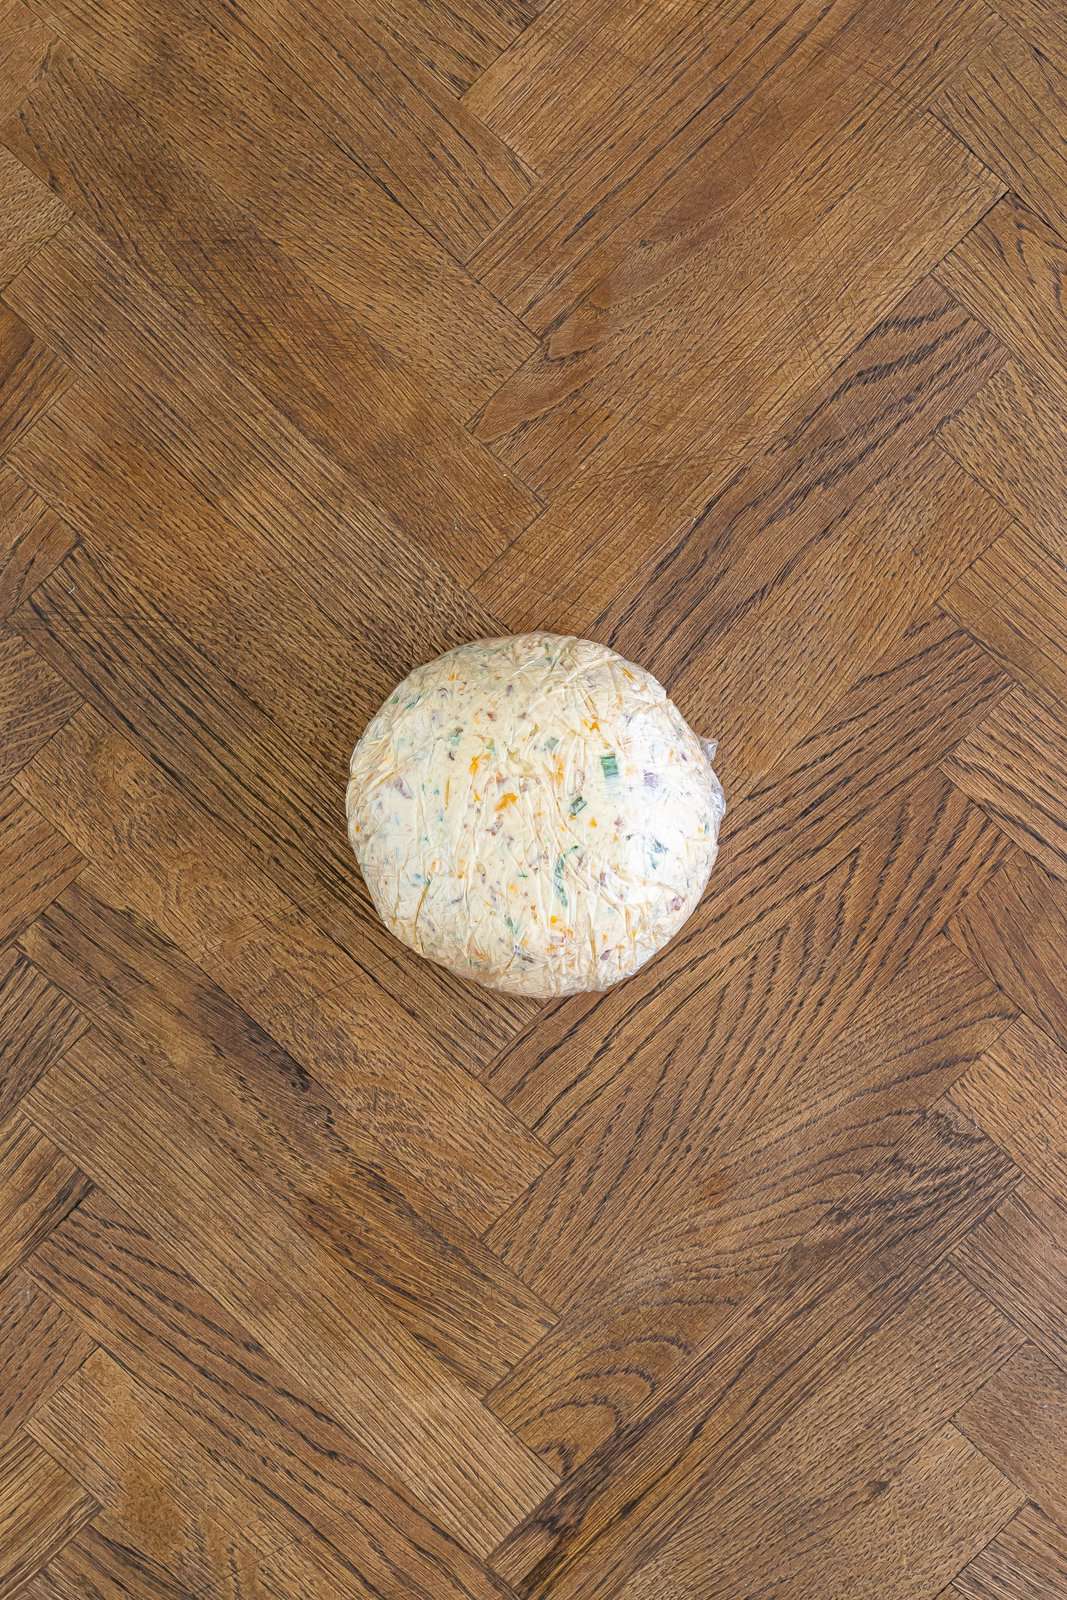 A rolled up cheese ball.